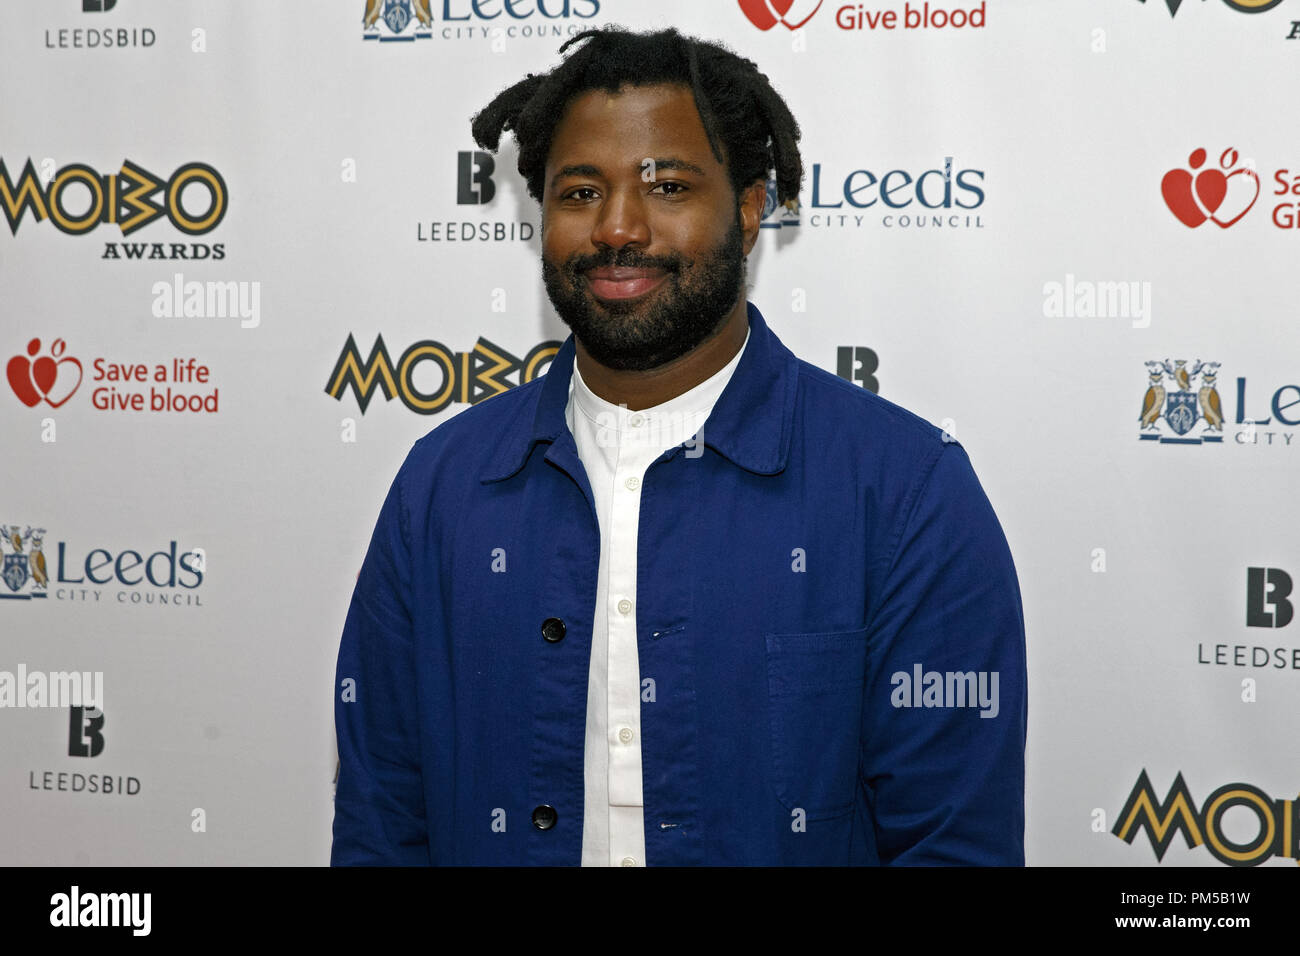 Sampha, British singer, songwriter and producer, on the red carpet at the 2017 MOBO Awards. He released his debut album Process earlier in the same year. Stock Photo